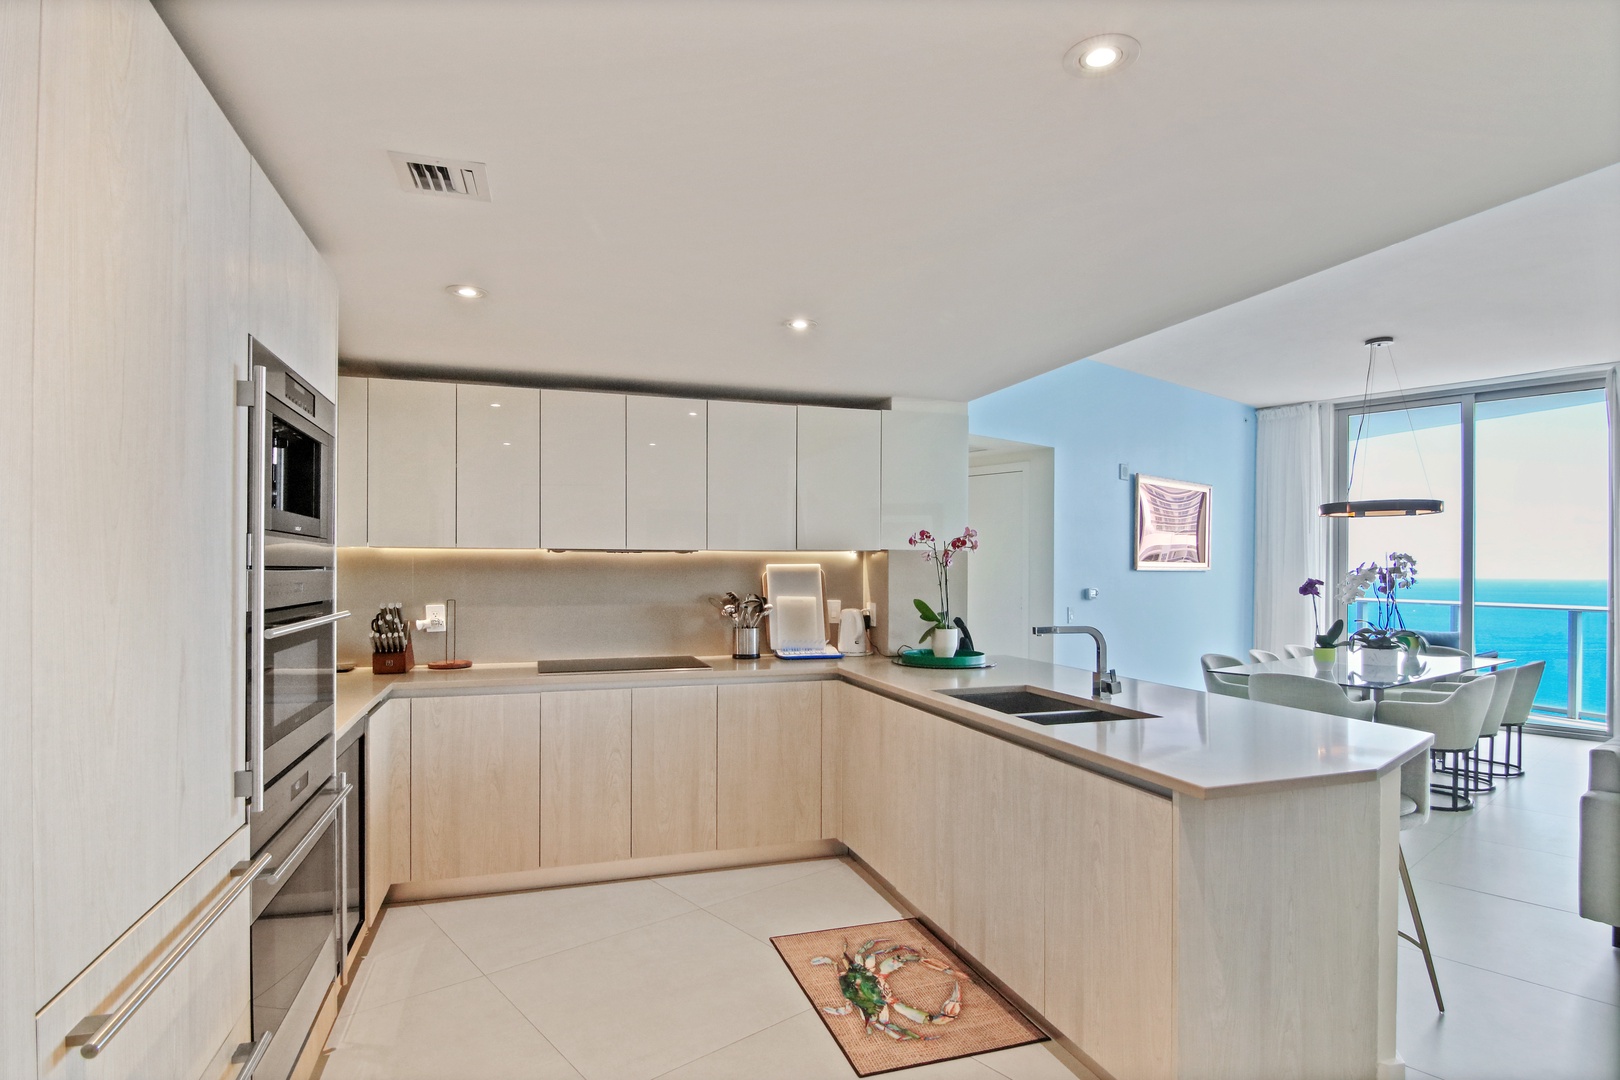 Prepare fabulous meals with a view in the open, spacious kitchen